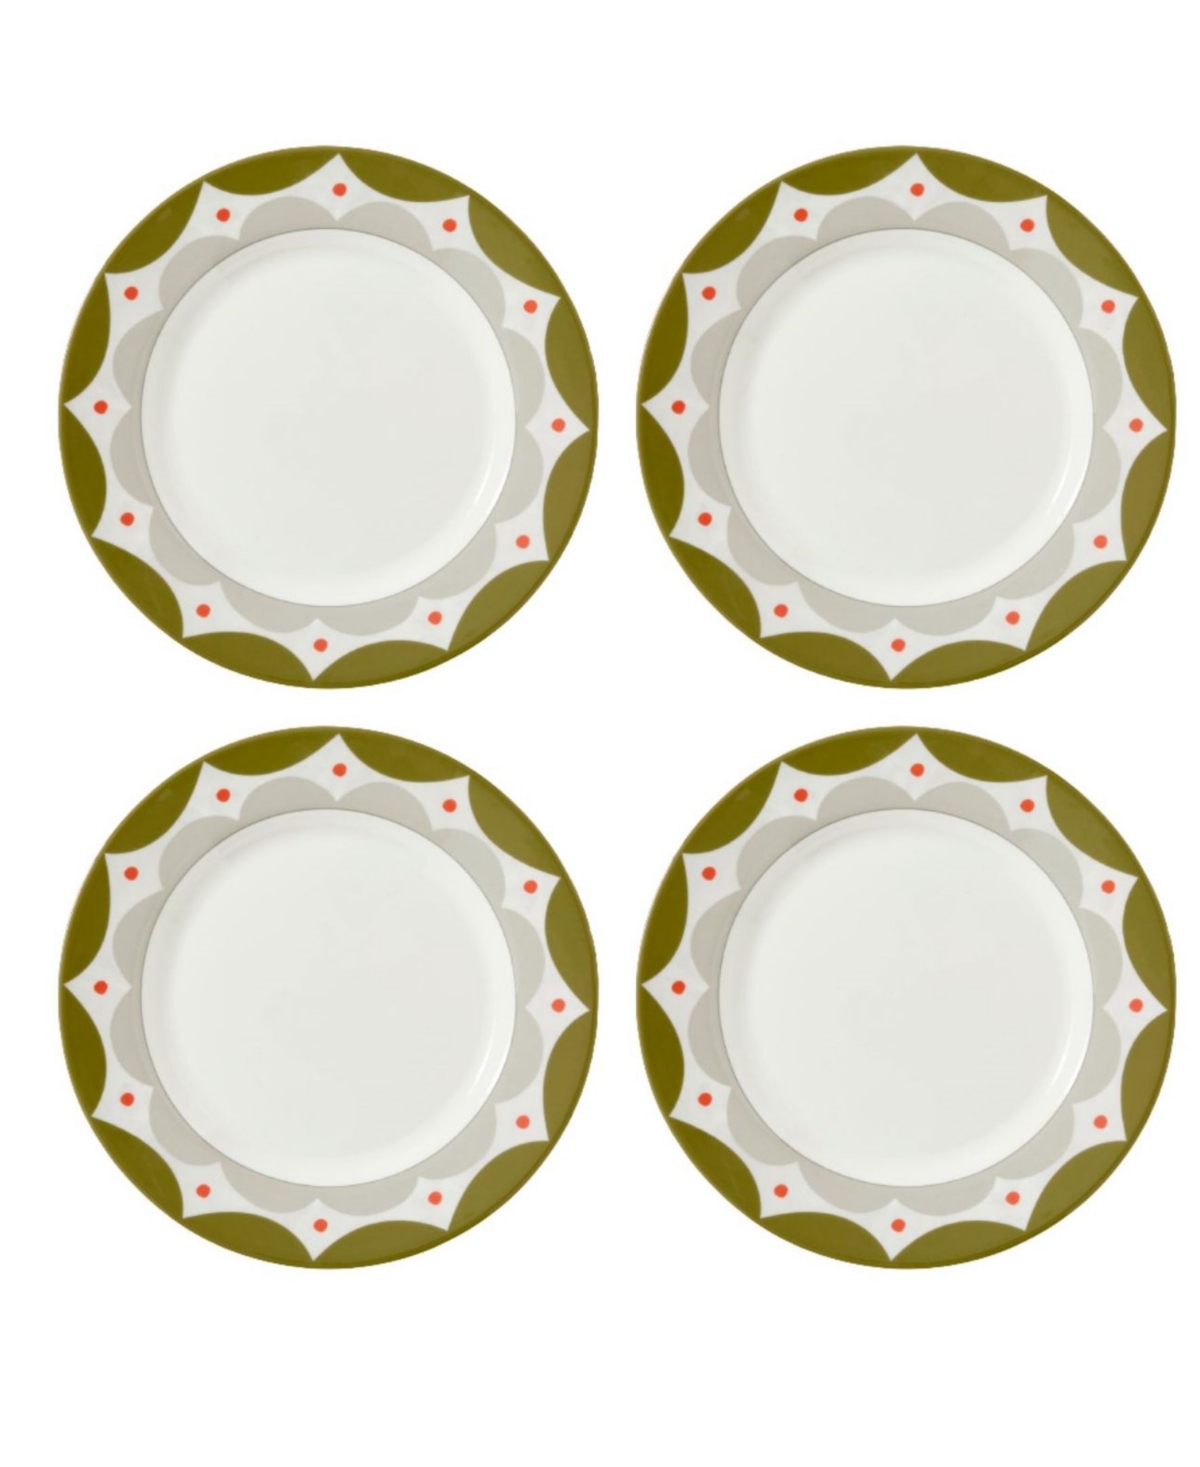 Geo 4 Piece Dinner Plates Set, Service for 4 - Assorted